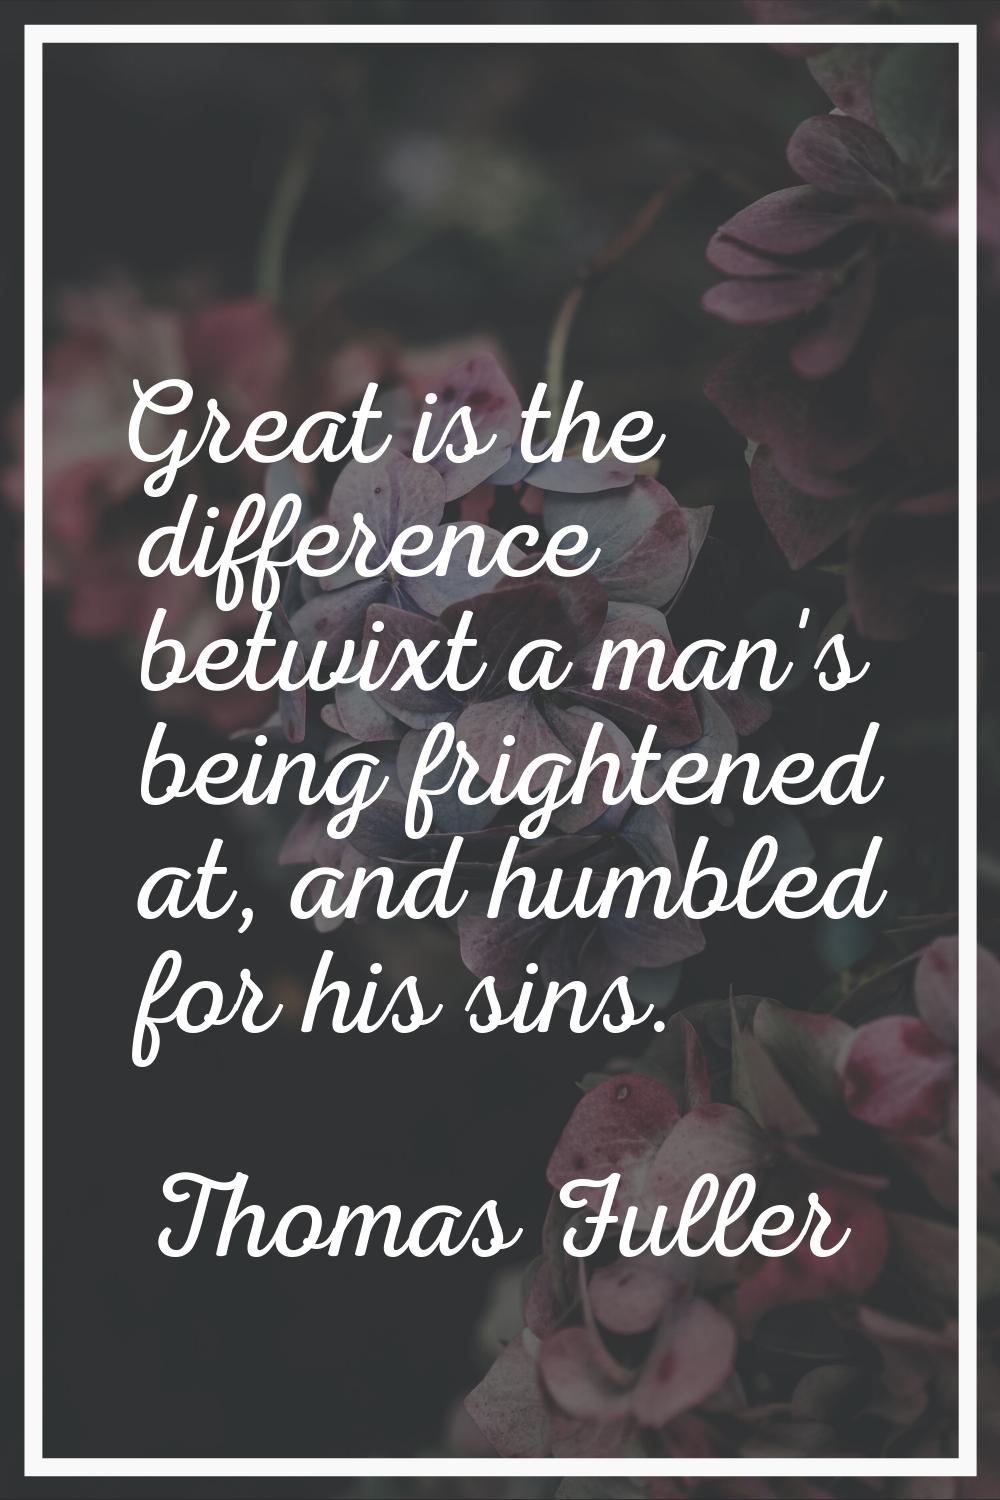 Great is the difference betwixt a man's being frightened at, and humbled for his sins.